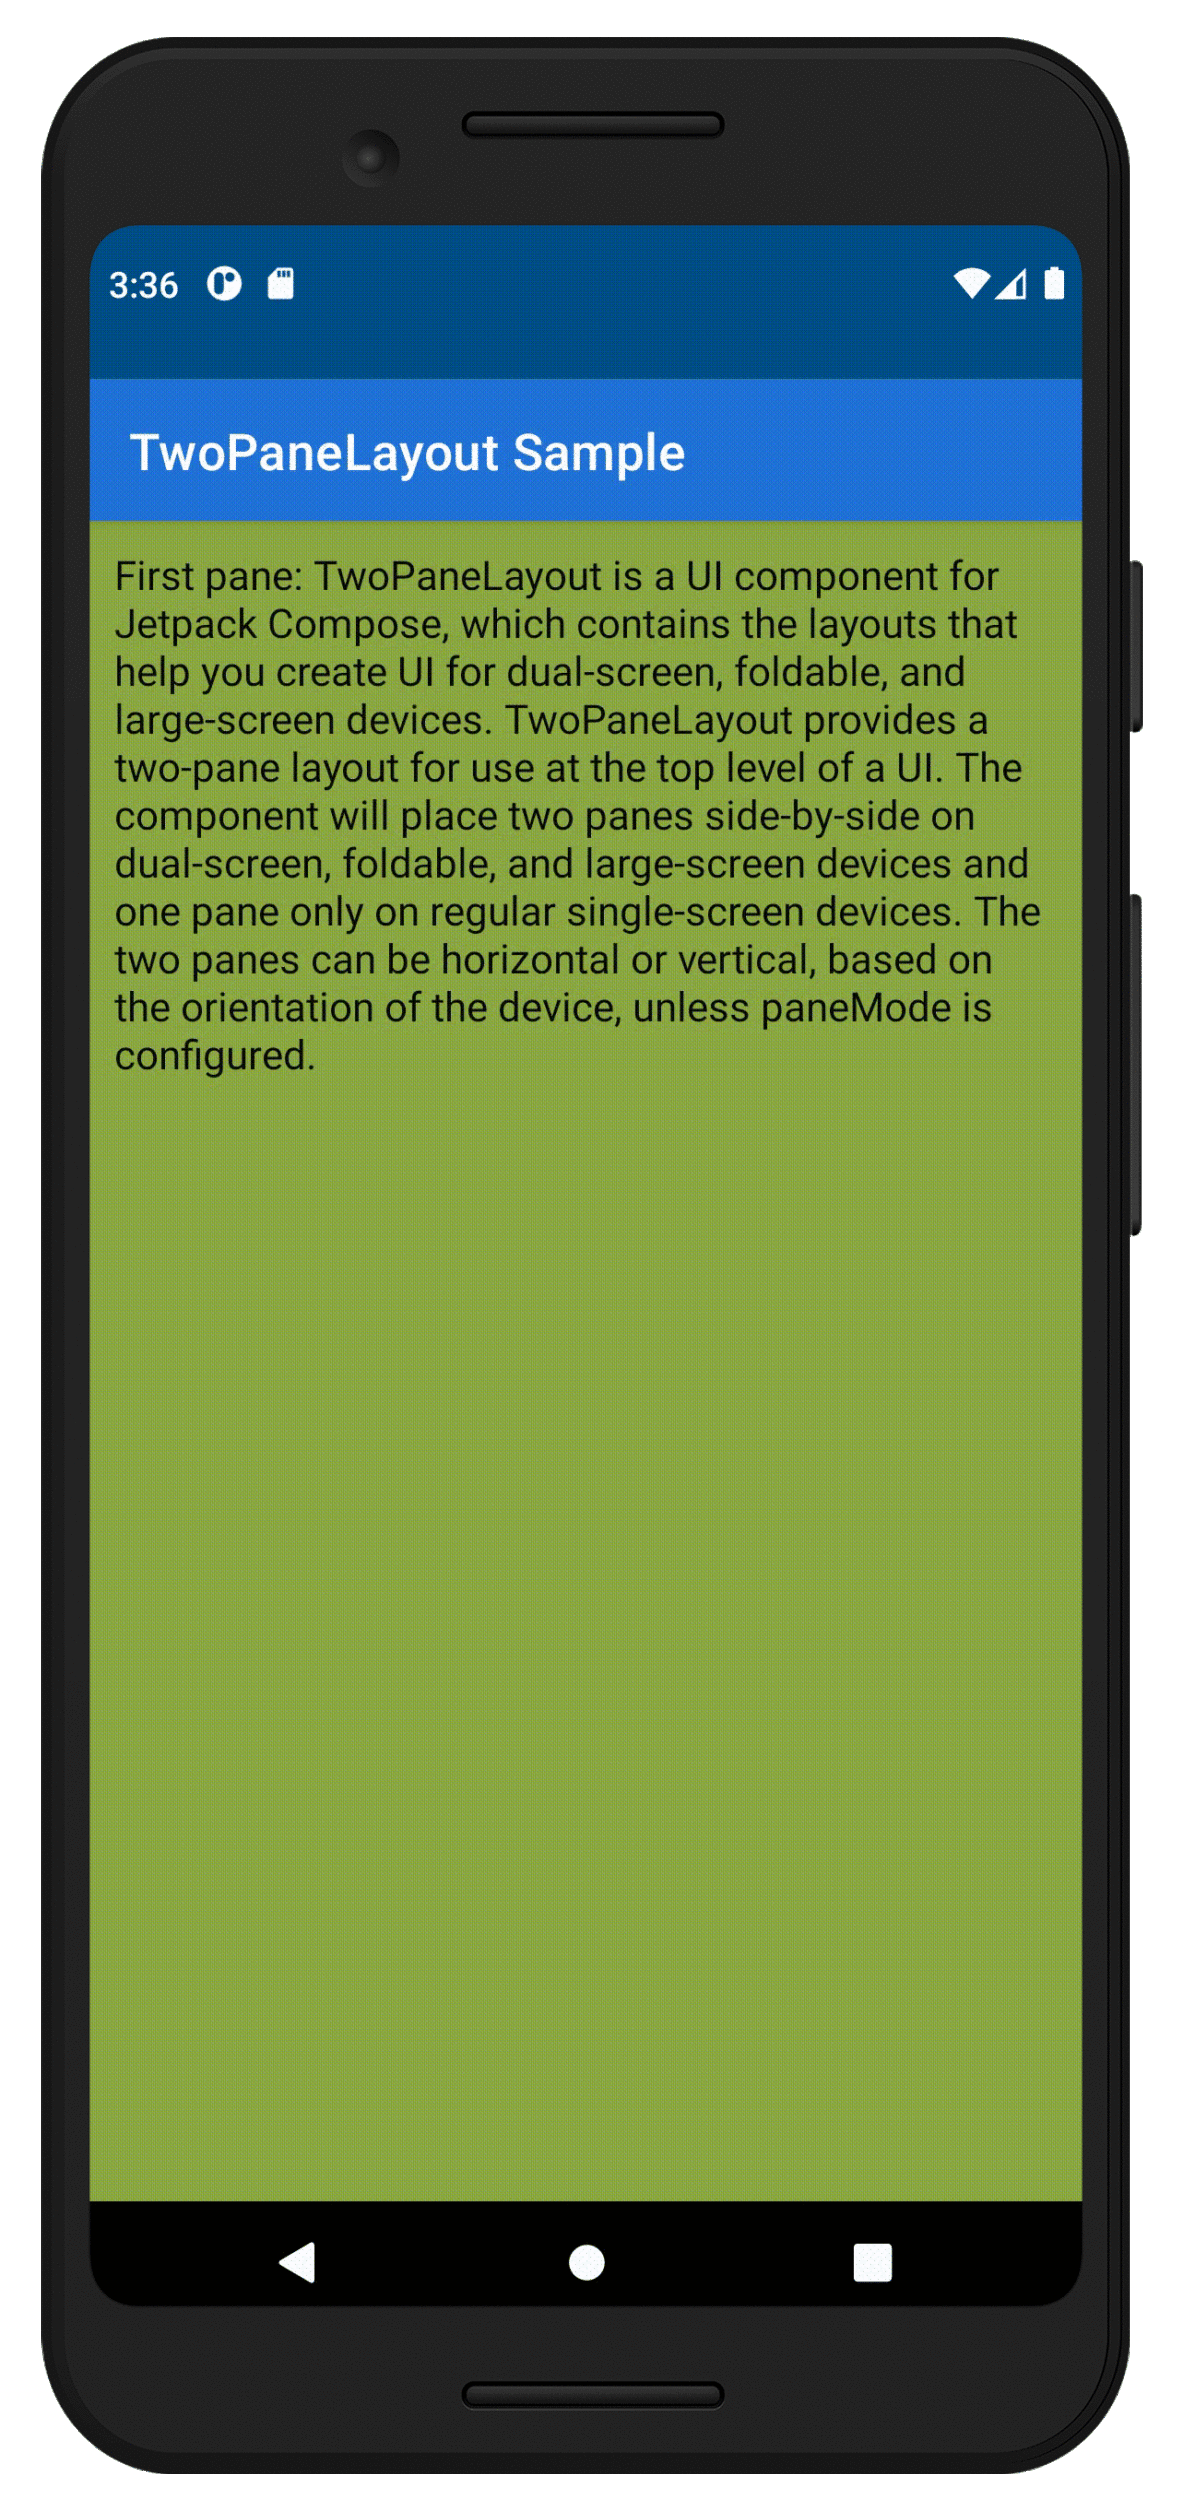 Animation of TwoPaneLayout on a single screen device, where navigation between pane 1 and pane 2 is shown